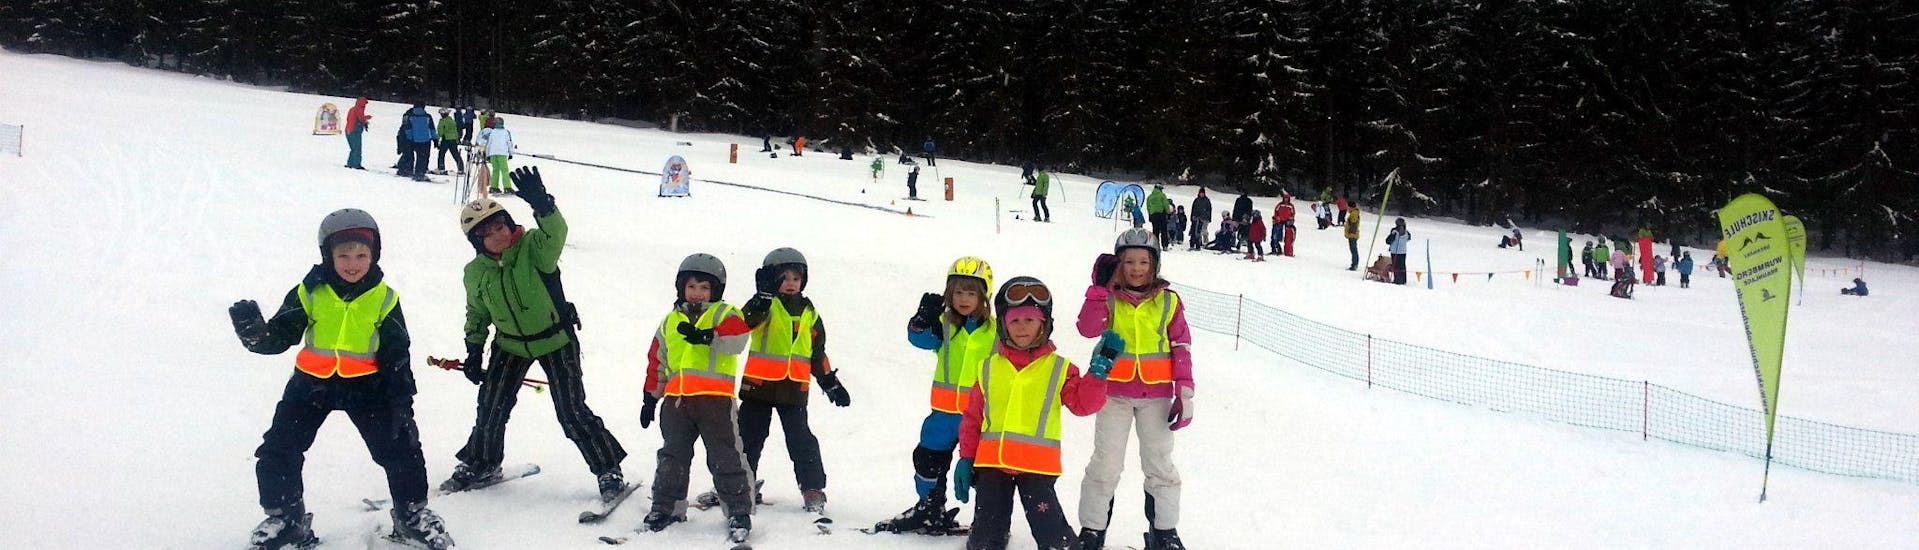 Kids Ski Lessons (6-8 y.) for First Timers.